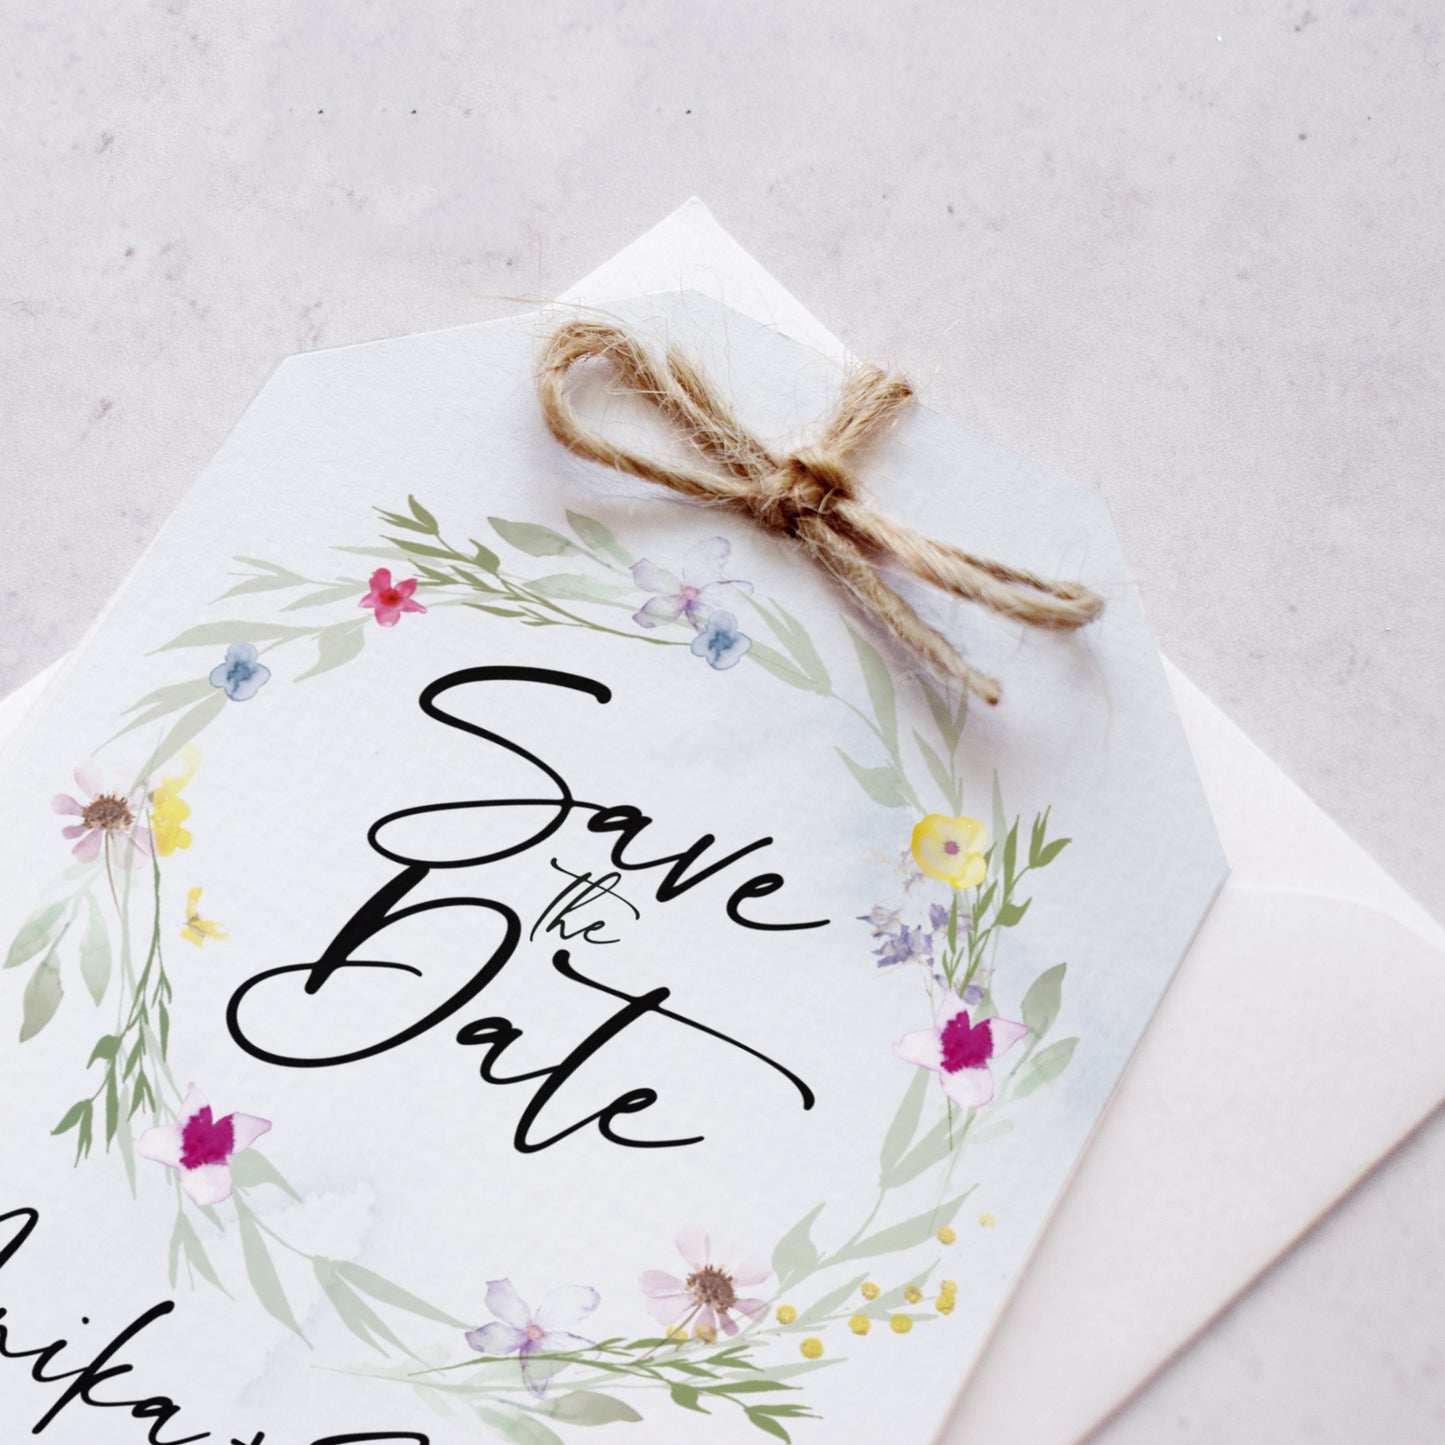 Save the date cards from our 'Flower Press Wreath' collection